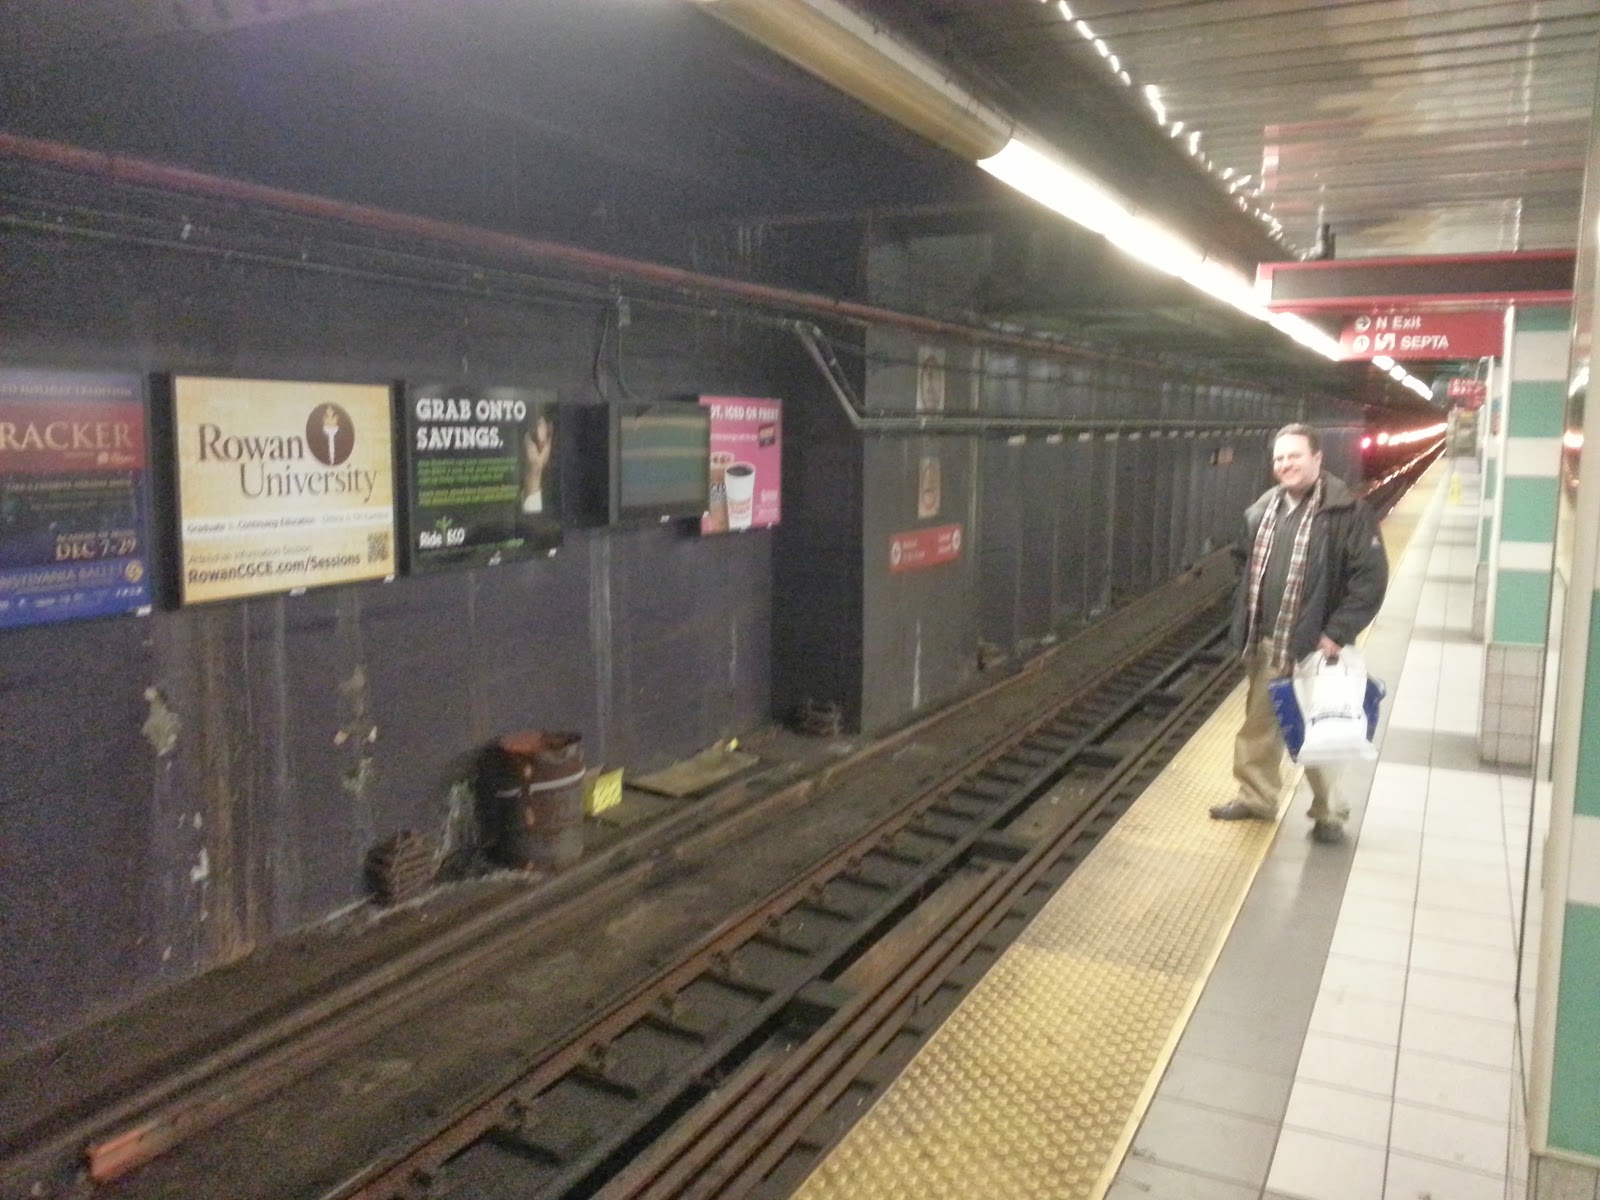 Much like TSW, this subway contains an in-universe reference to the blog author.